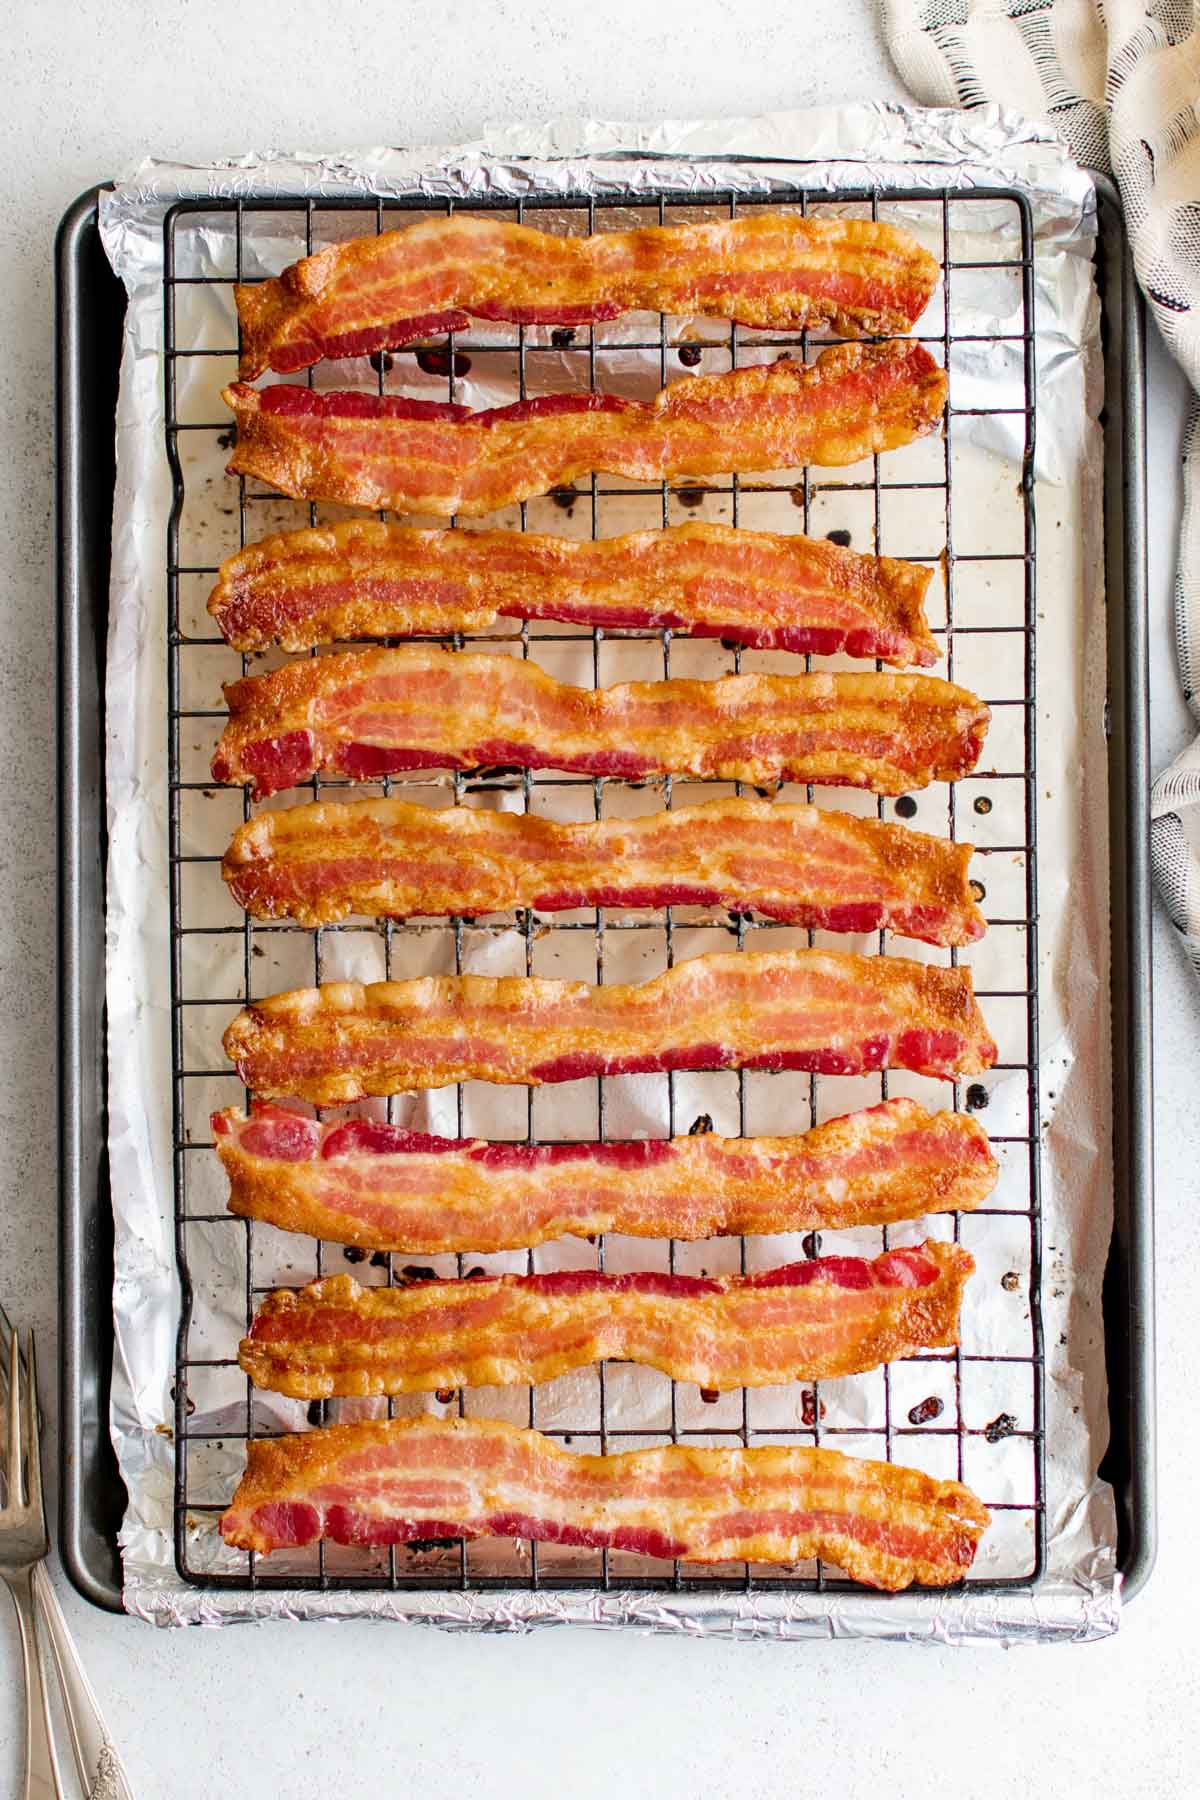 How to Bake Bake Bacon so It's Perfectly Cooked! - 365 Days of